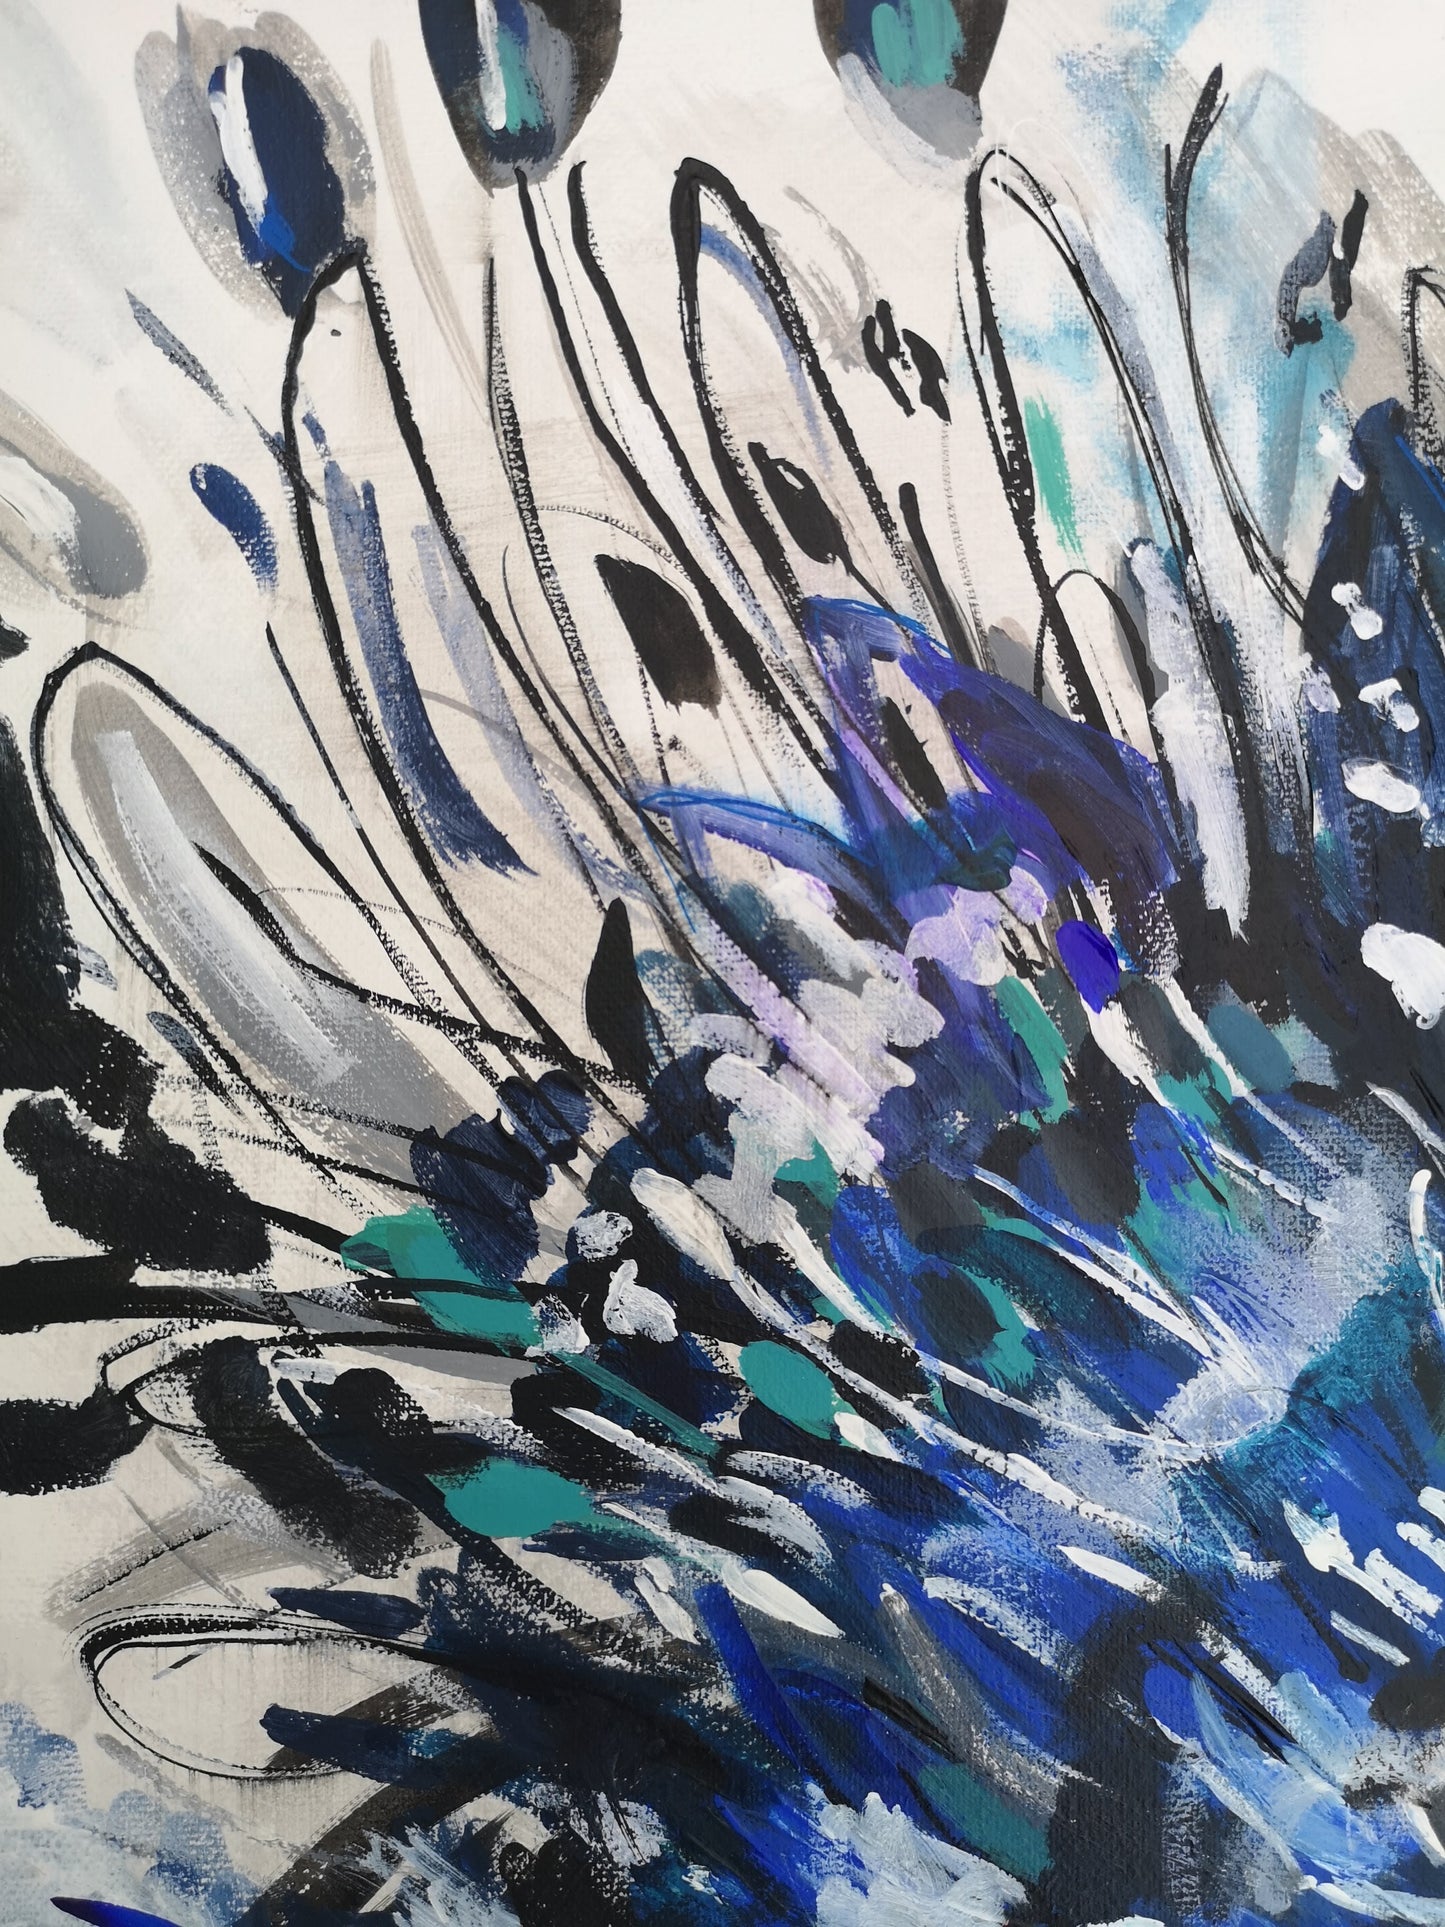 details Abstract Acrylic Painting Cornflower Blue Burst Square Canvas teal black grey white sky blue, flower, bloom, floral artwork, judy century